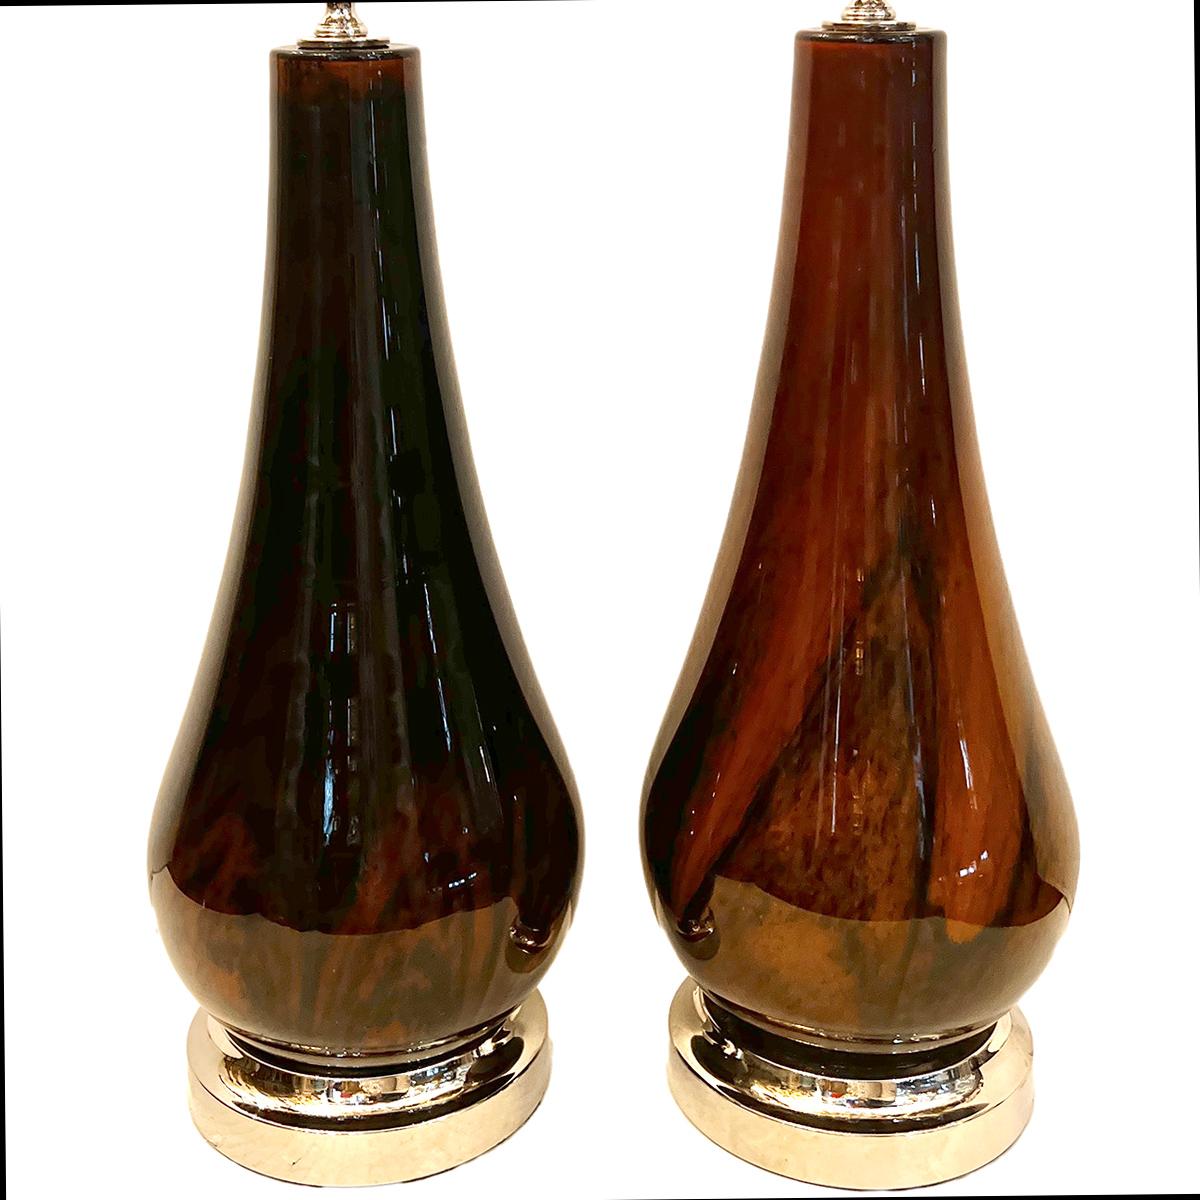 Pair of circa 1960's French art glass table lamps.

Measurements:
Height of body: 18.5